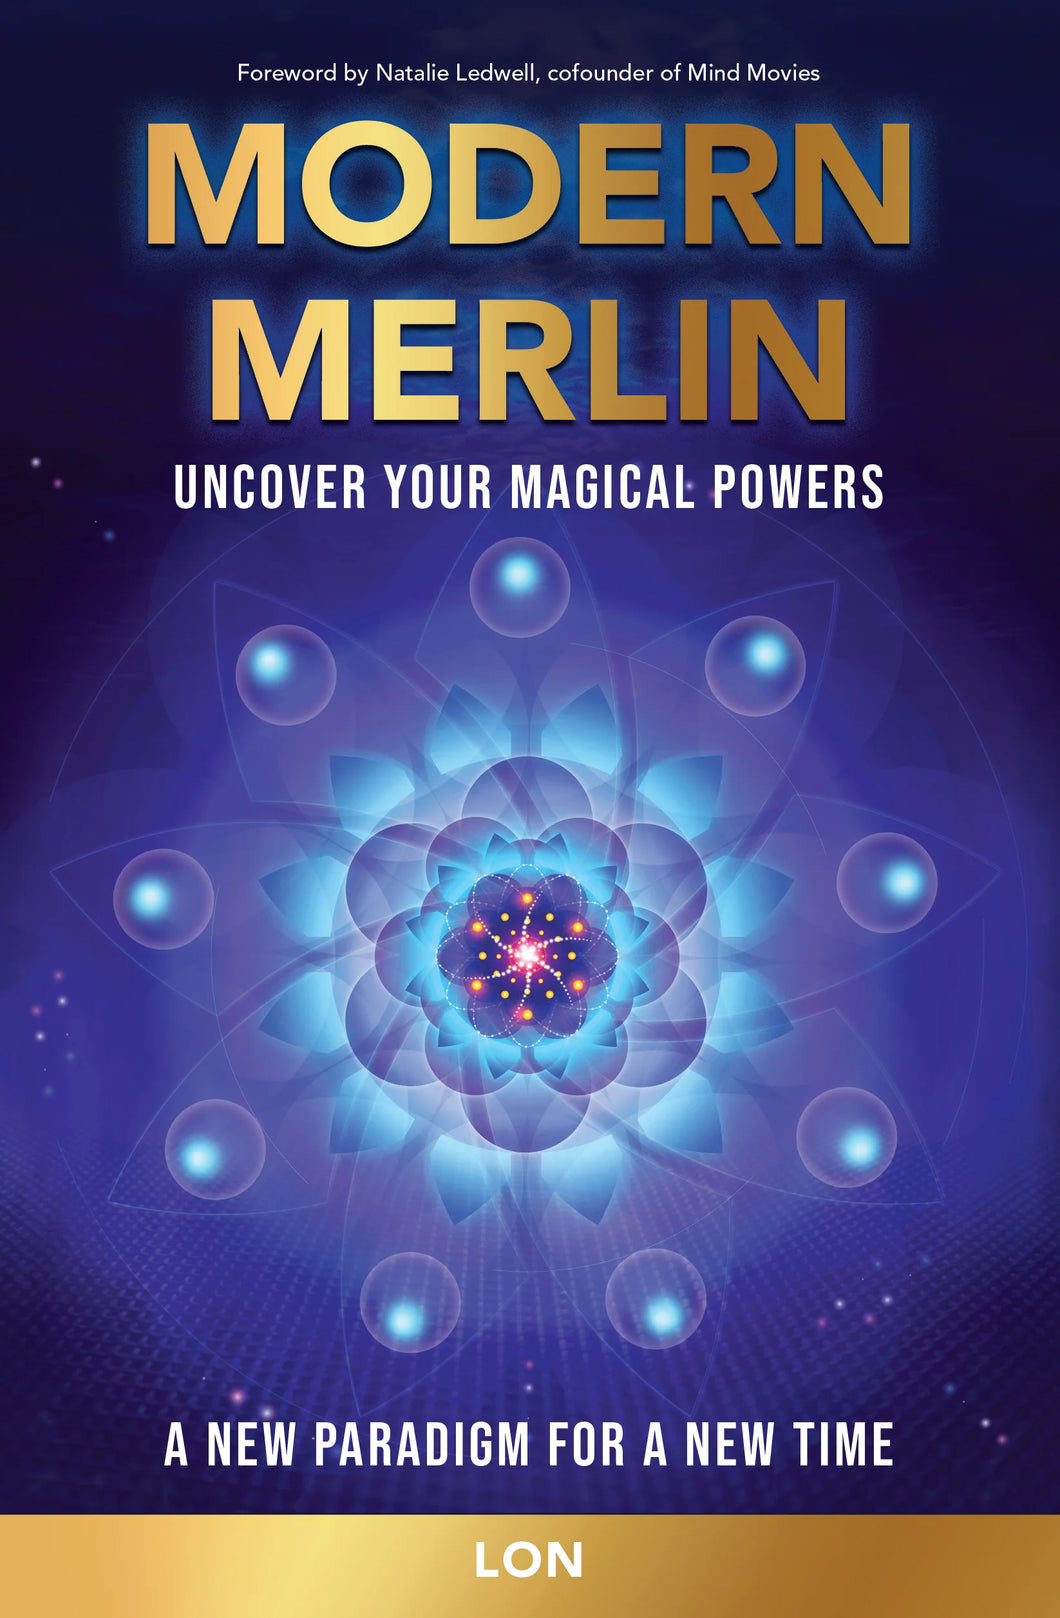 MODERN MERLIN: UNCOVER YOUR MAGICAL POWERS